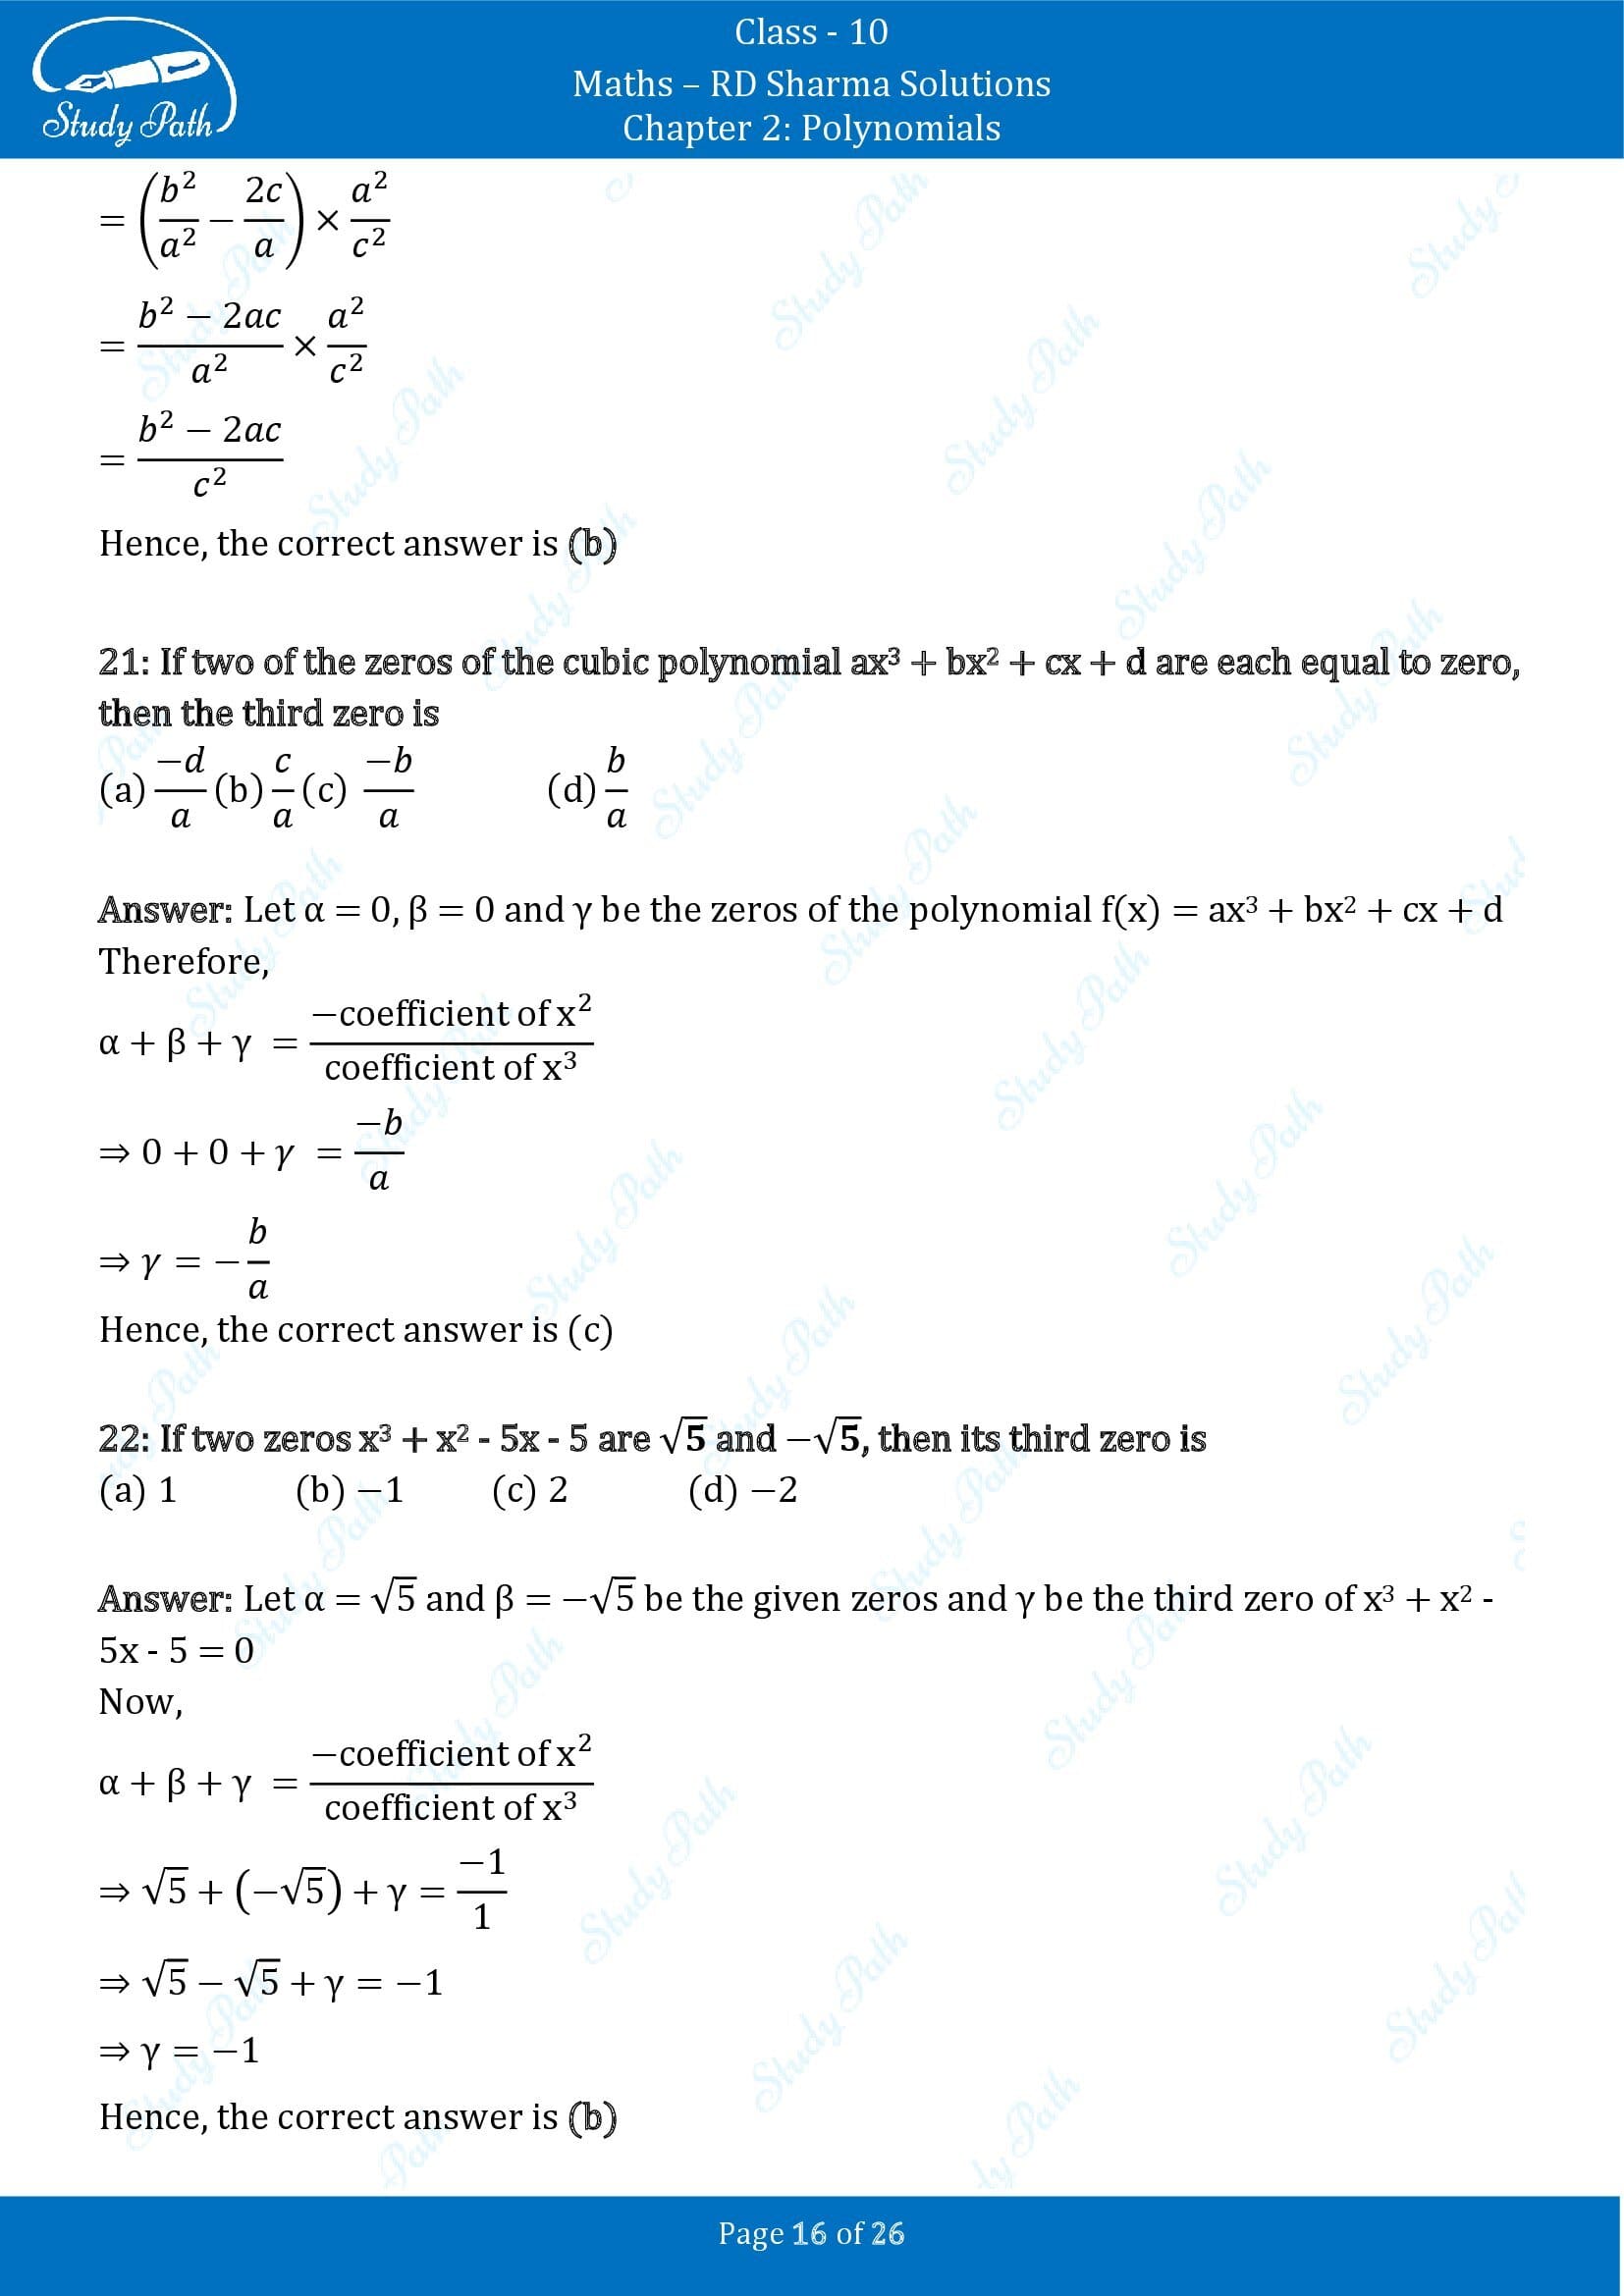 RD Sharma Solutions Class 10 Chapter 2 Polynomials Multiple Choice Questions MCQs 00016